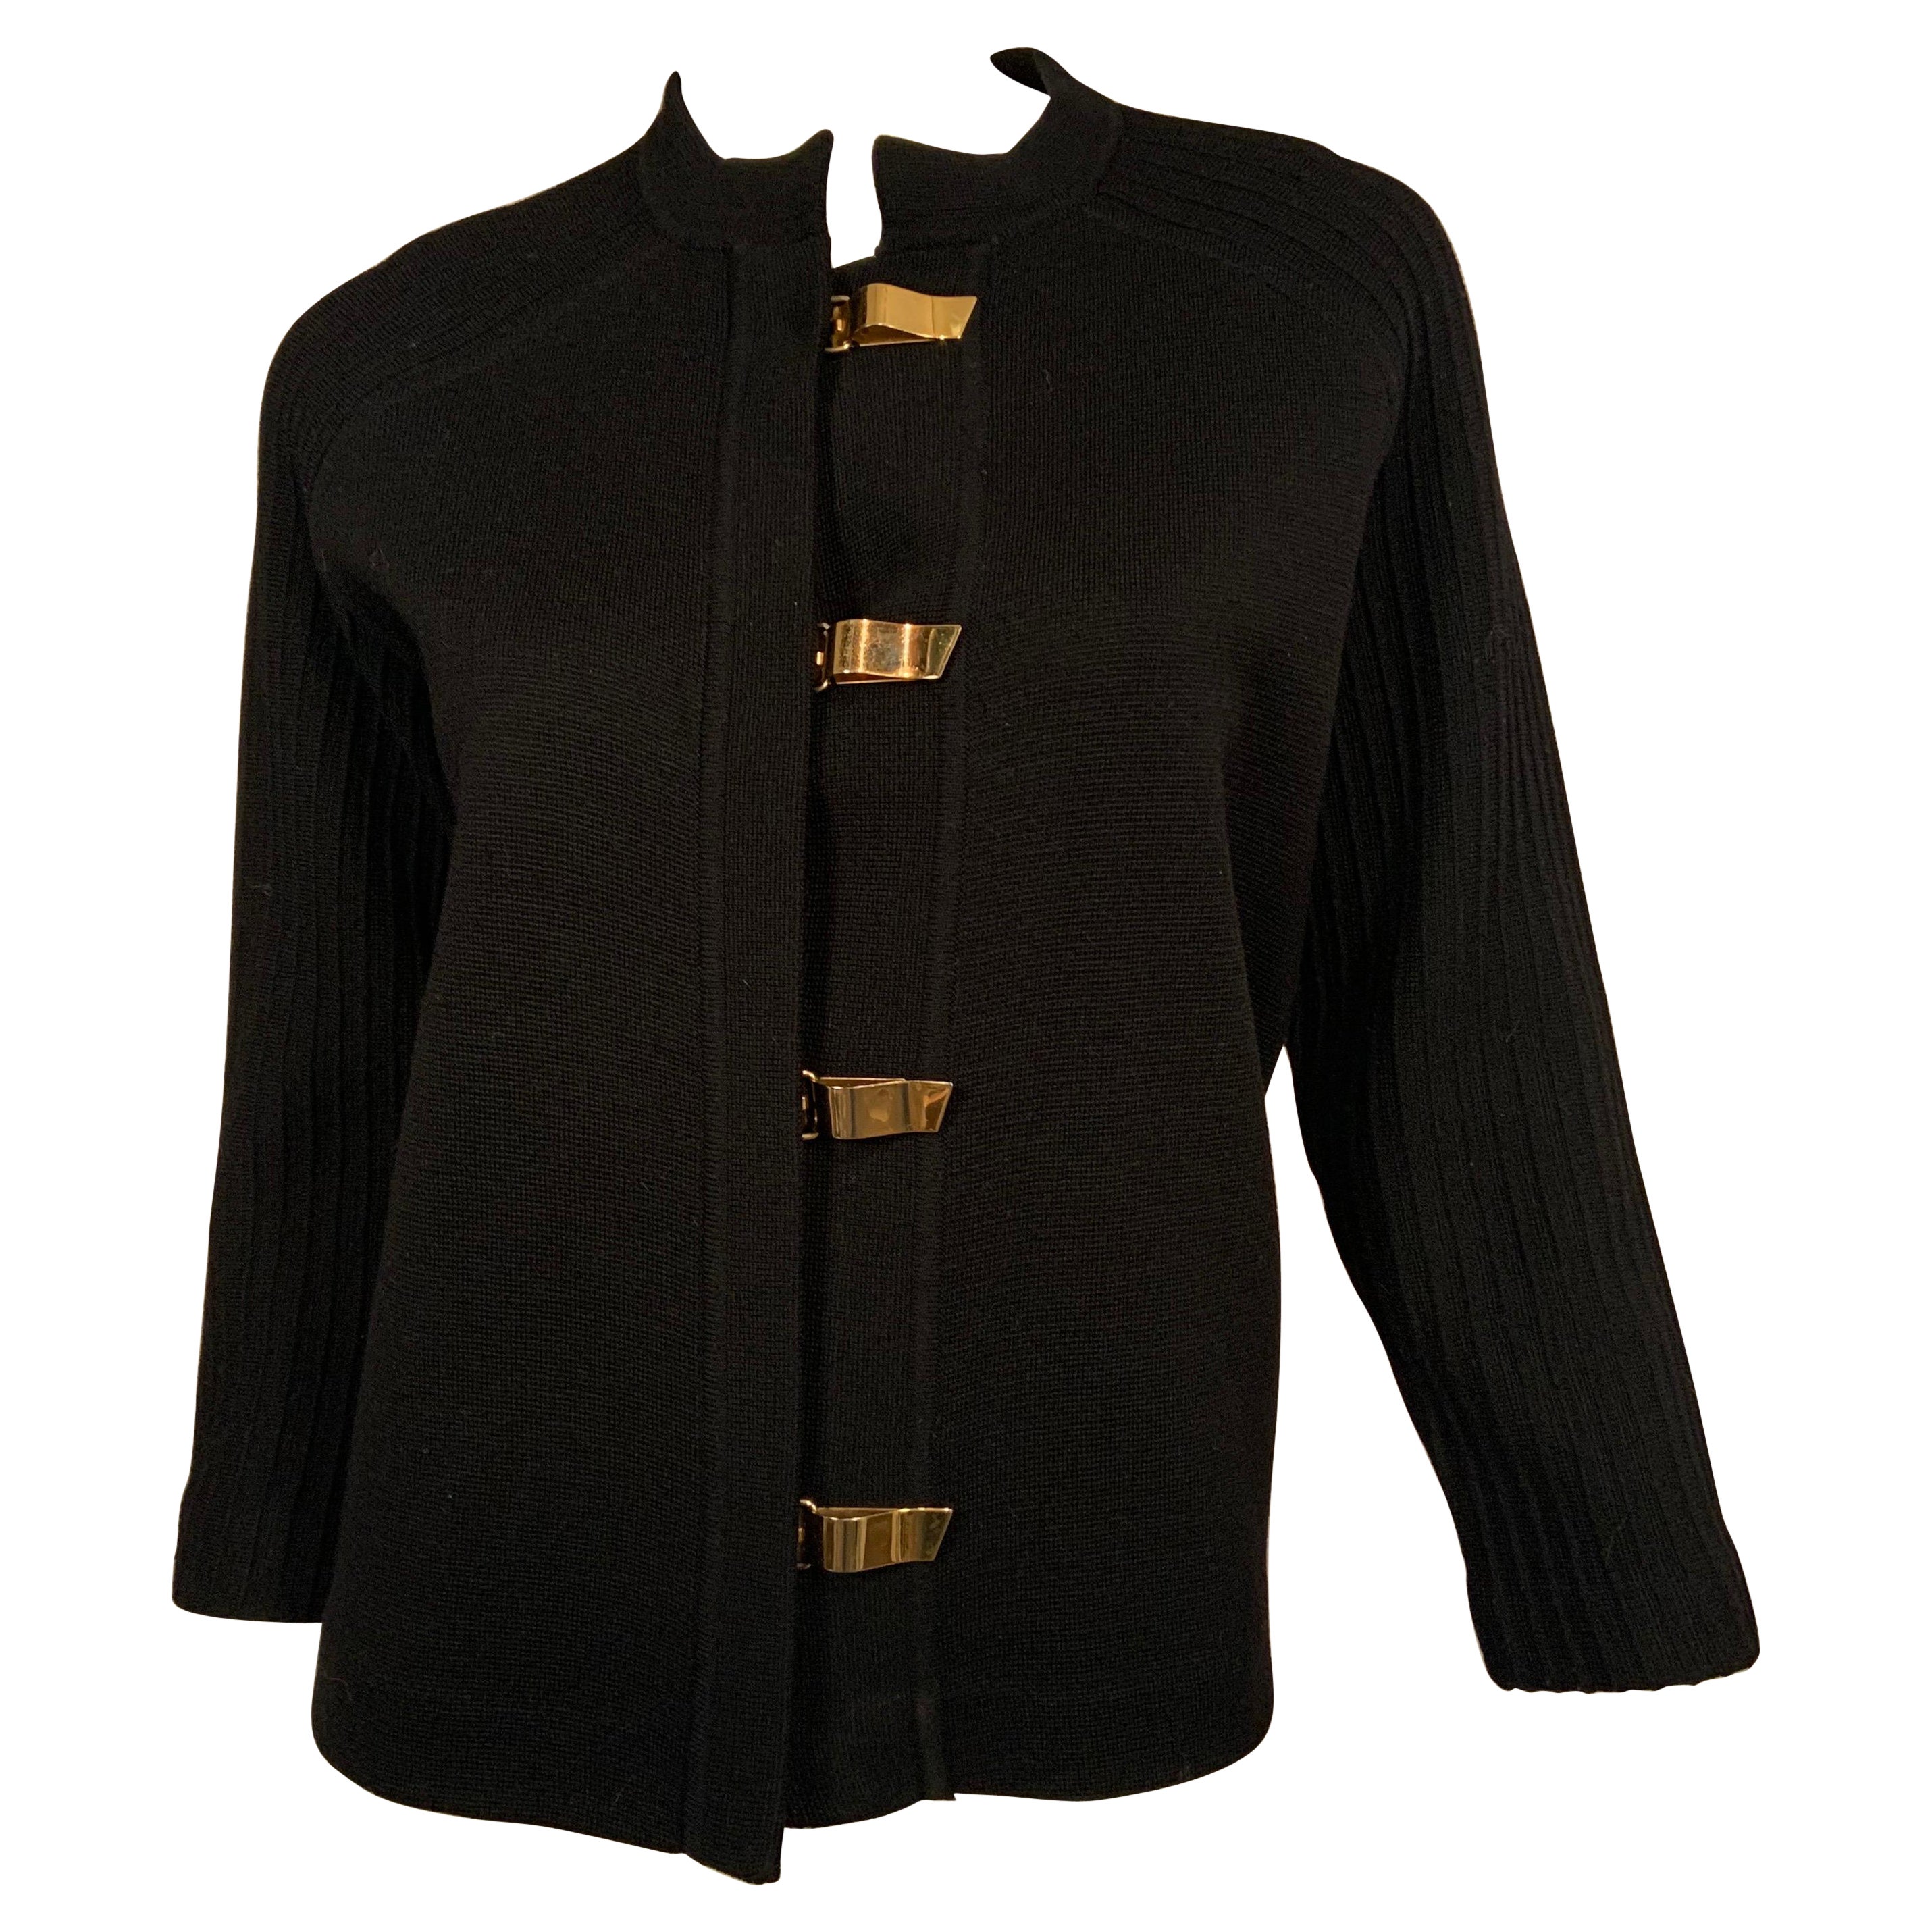 1960's Black Wool Cardigan Sweater with Gold Toned Toggle Closure